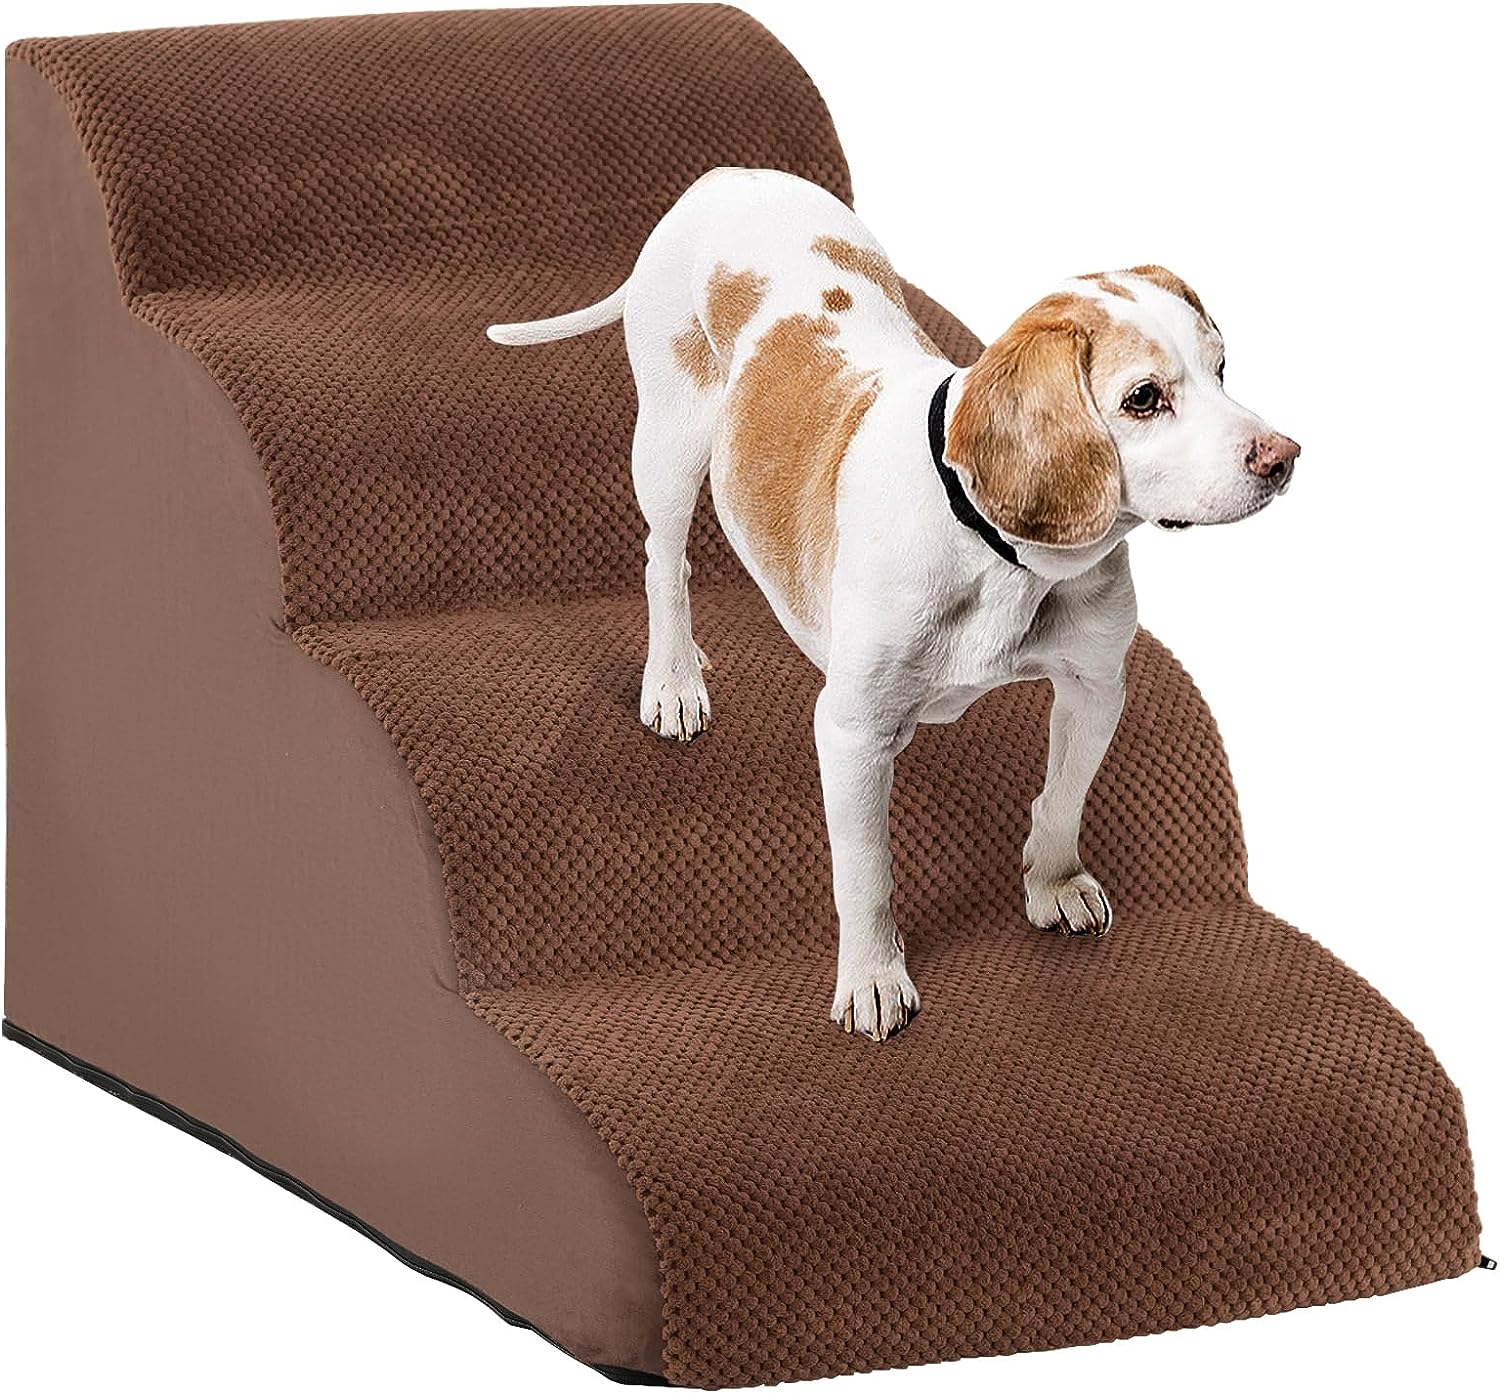 Giantex Dog Ramp Stairs for Bed